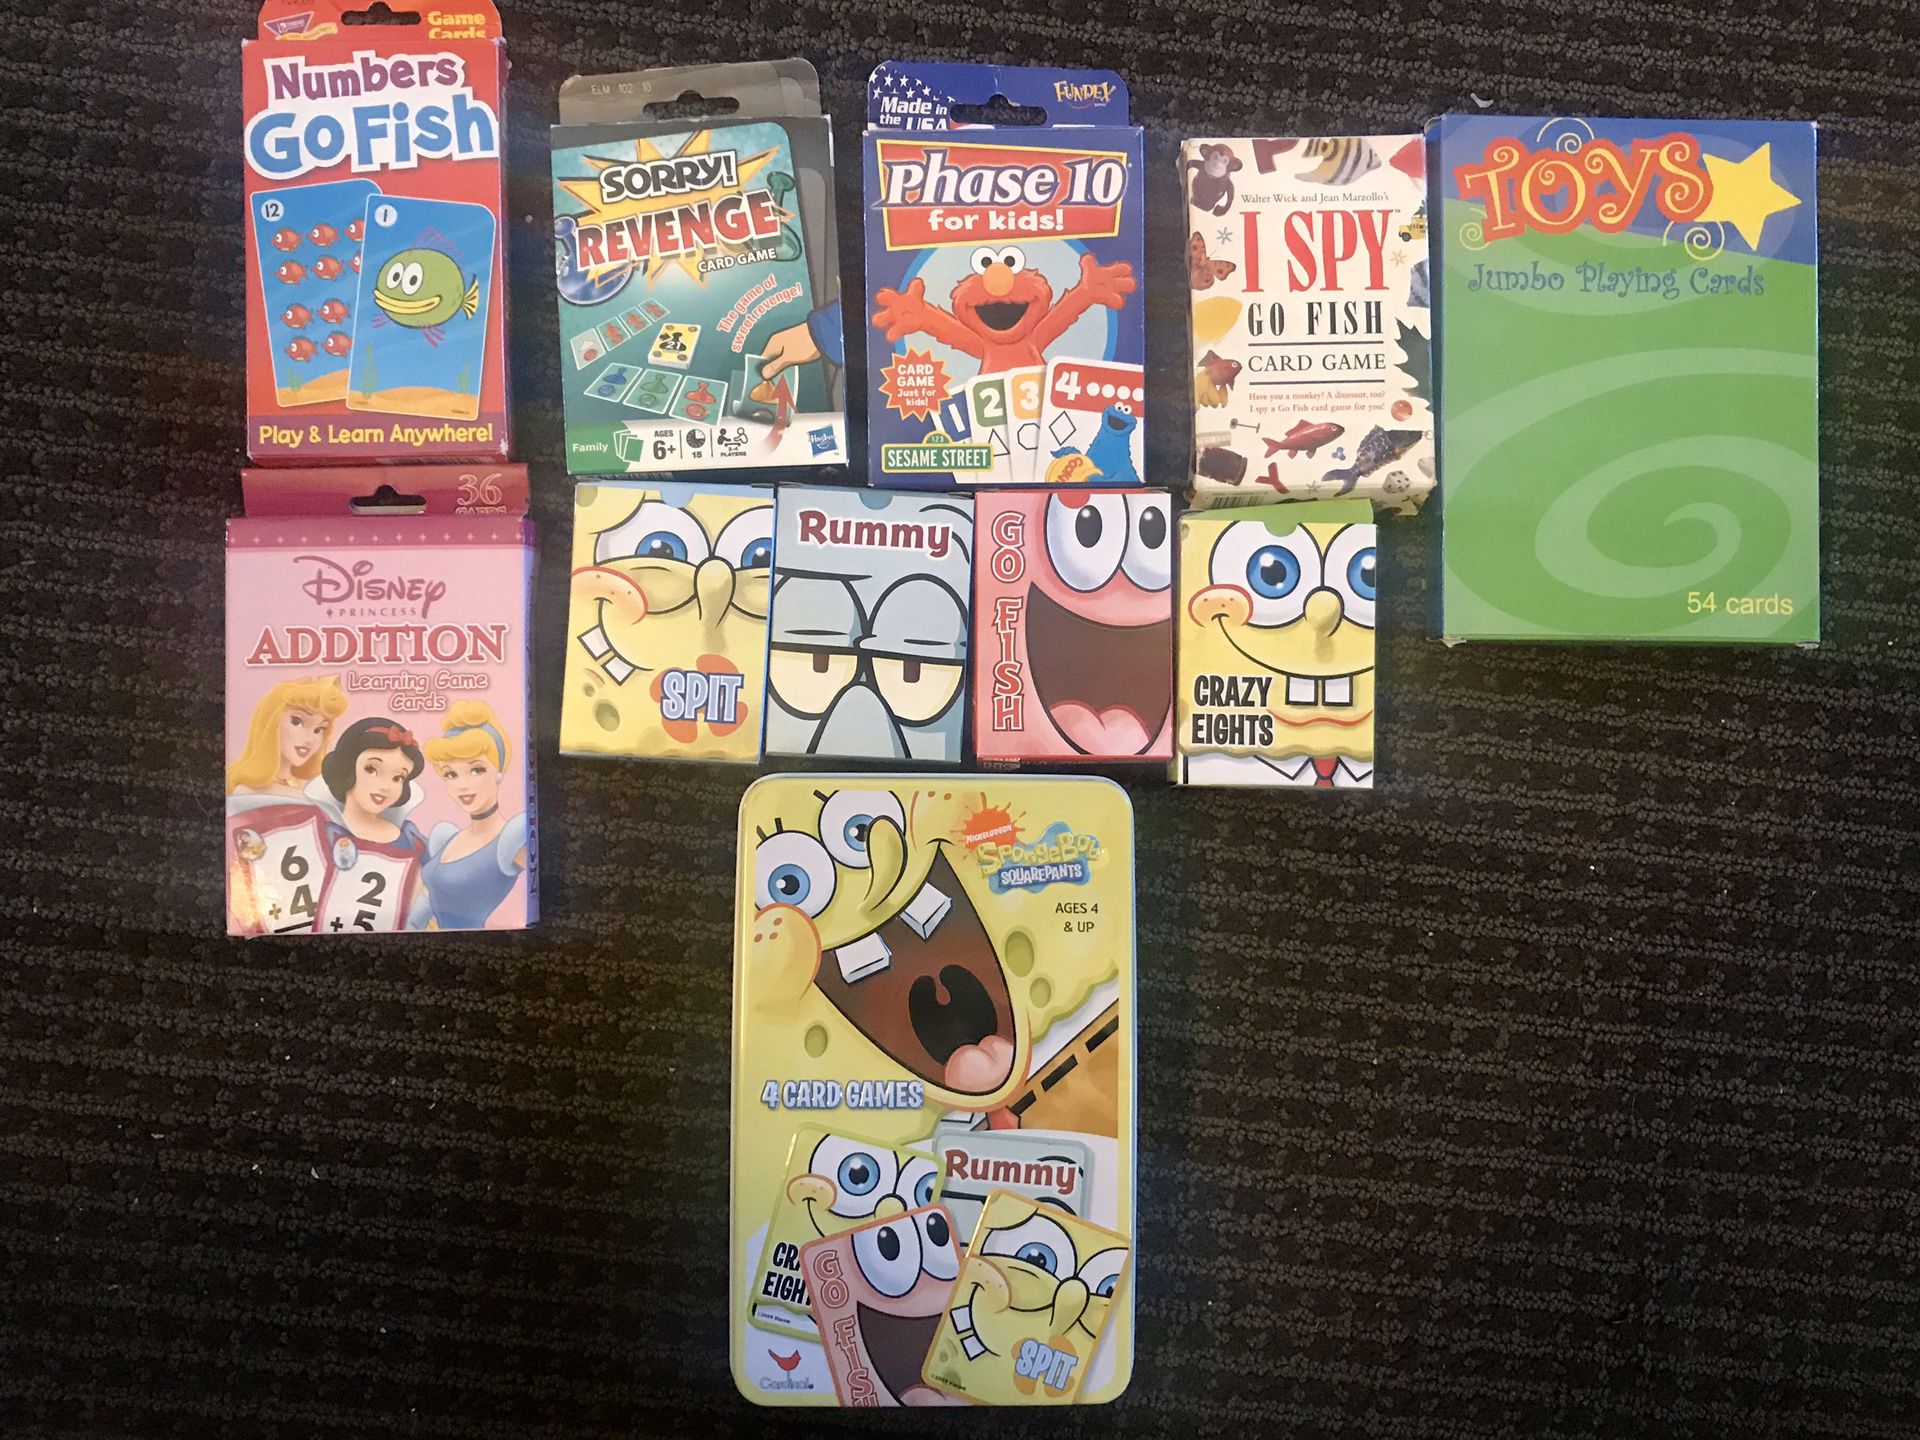 10 card games for kids for $10